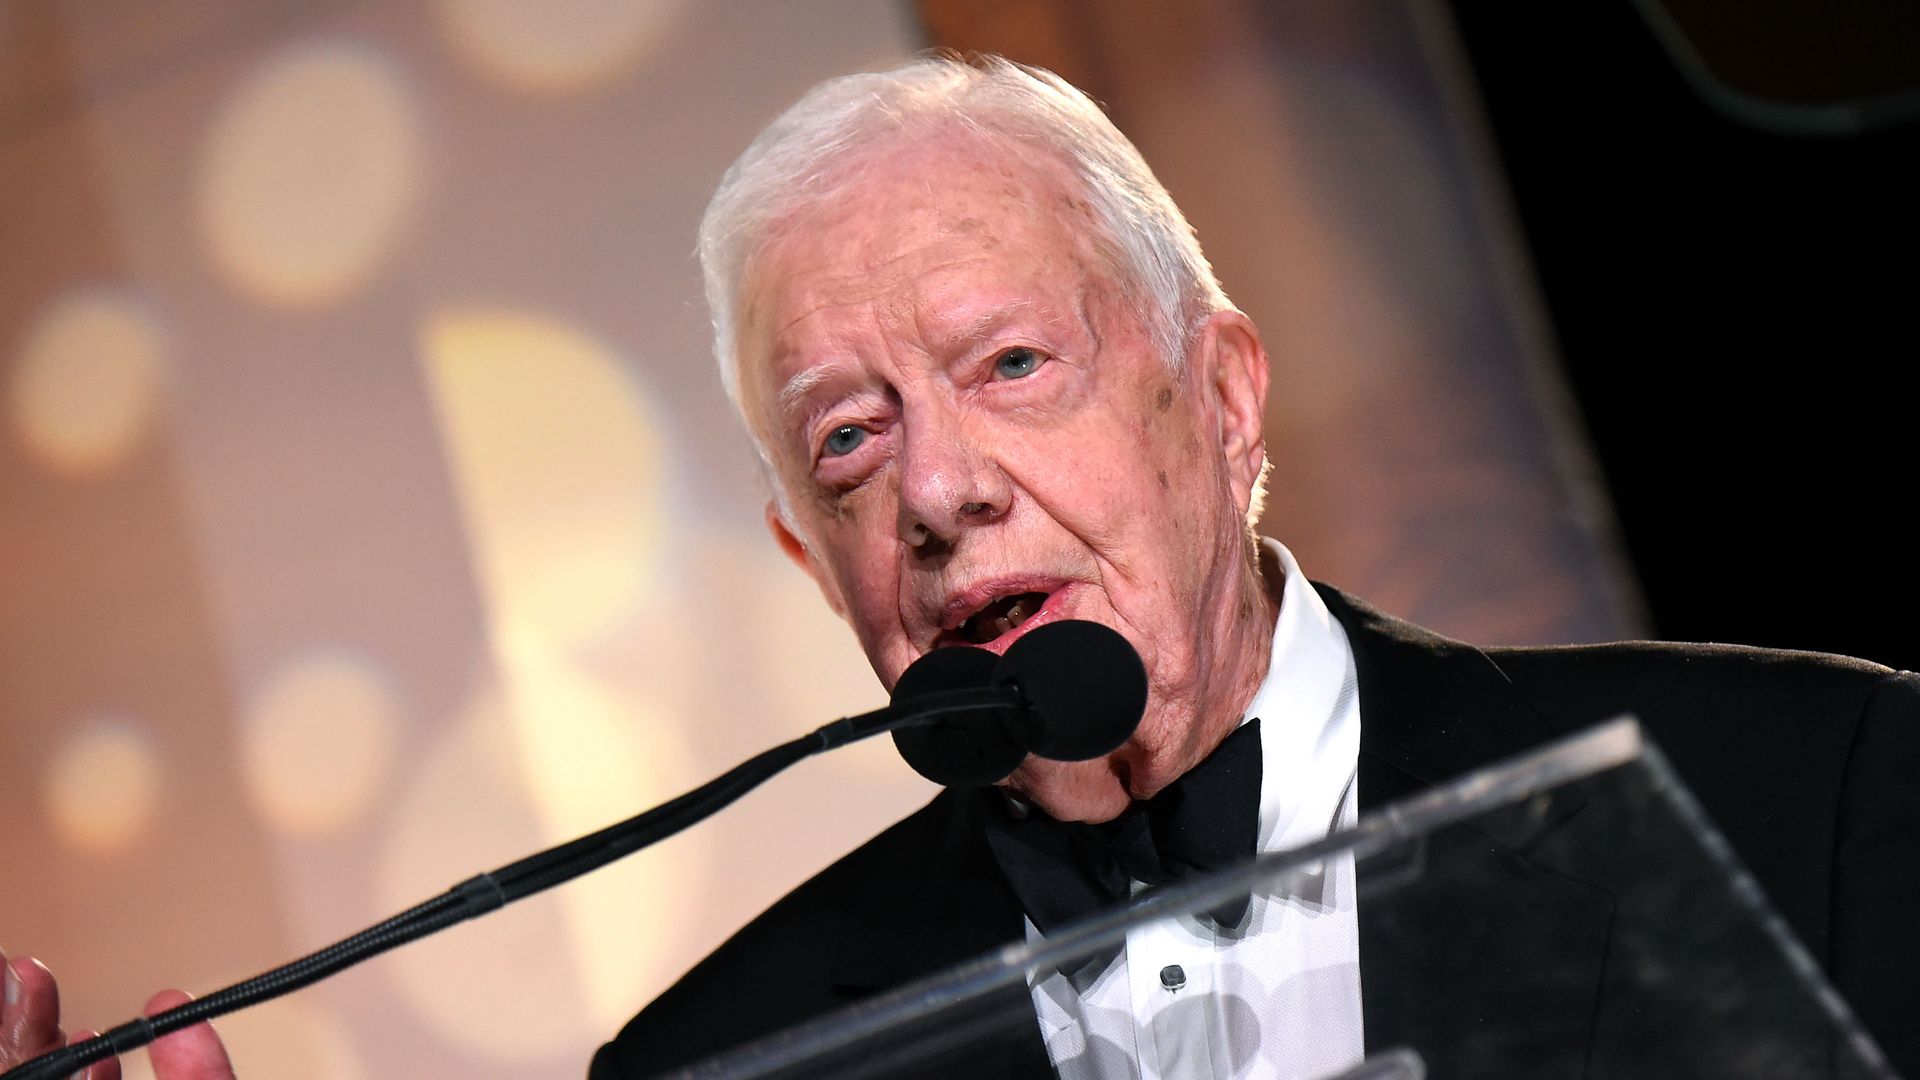 Photo of Jimmy Carter speaking into a mic at a formal event